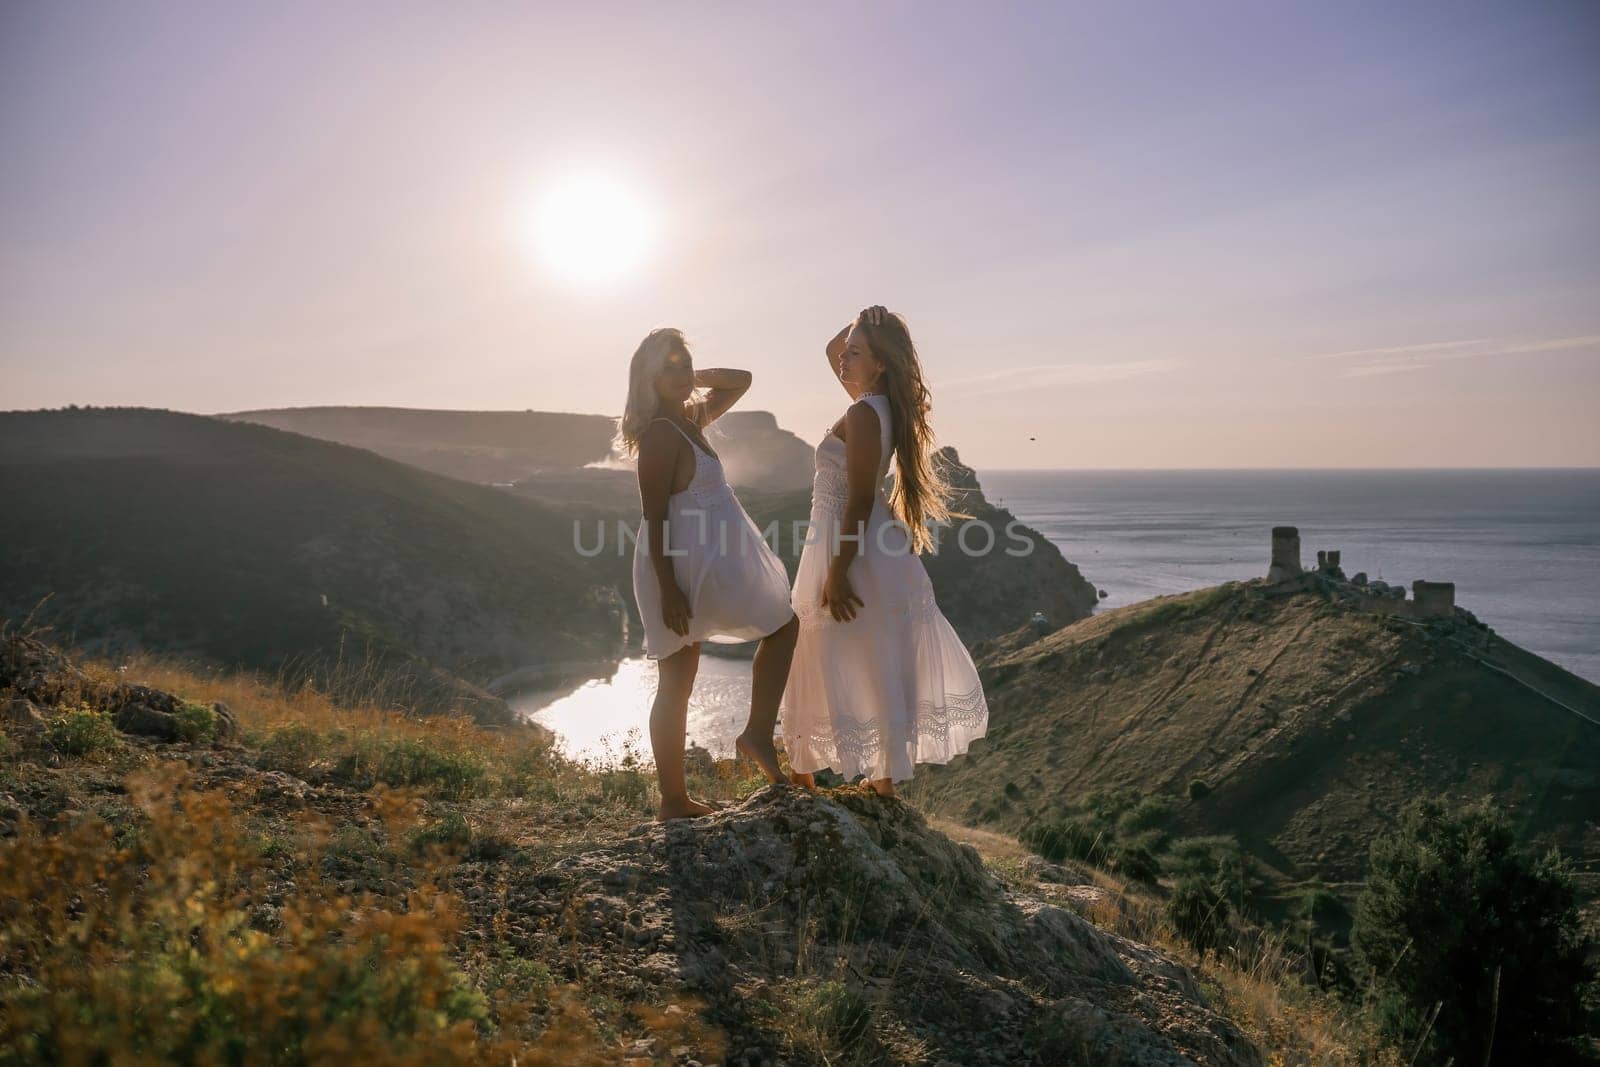 Two young girls are standing on a hillside, one of them wearing a white dress. The sun is shining brightly, creating a warm and inviting atmosphere. The girls seem to be enjoying their time together. by Matiunina